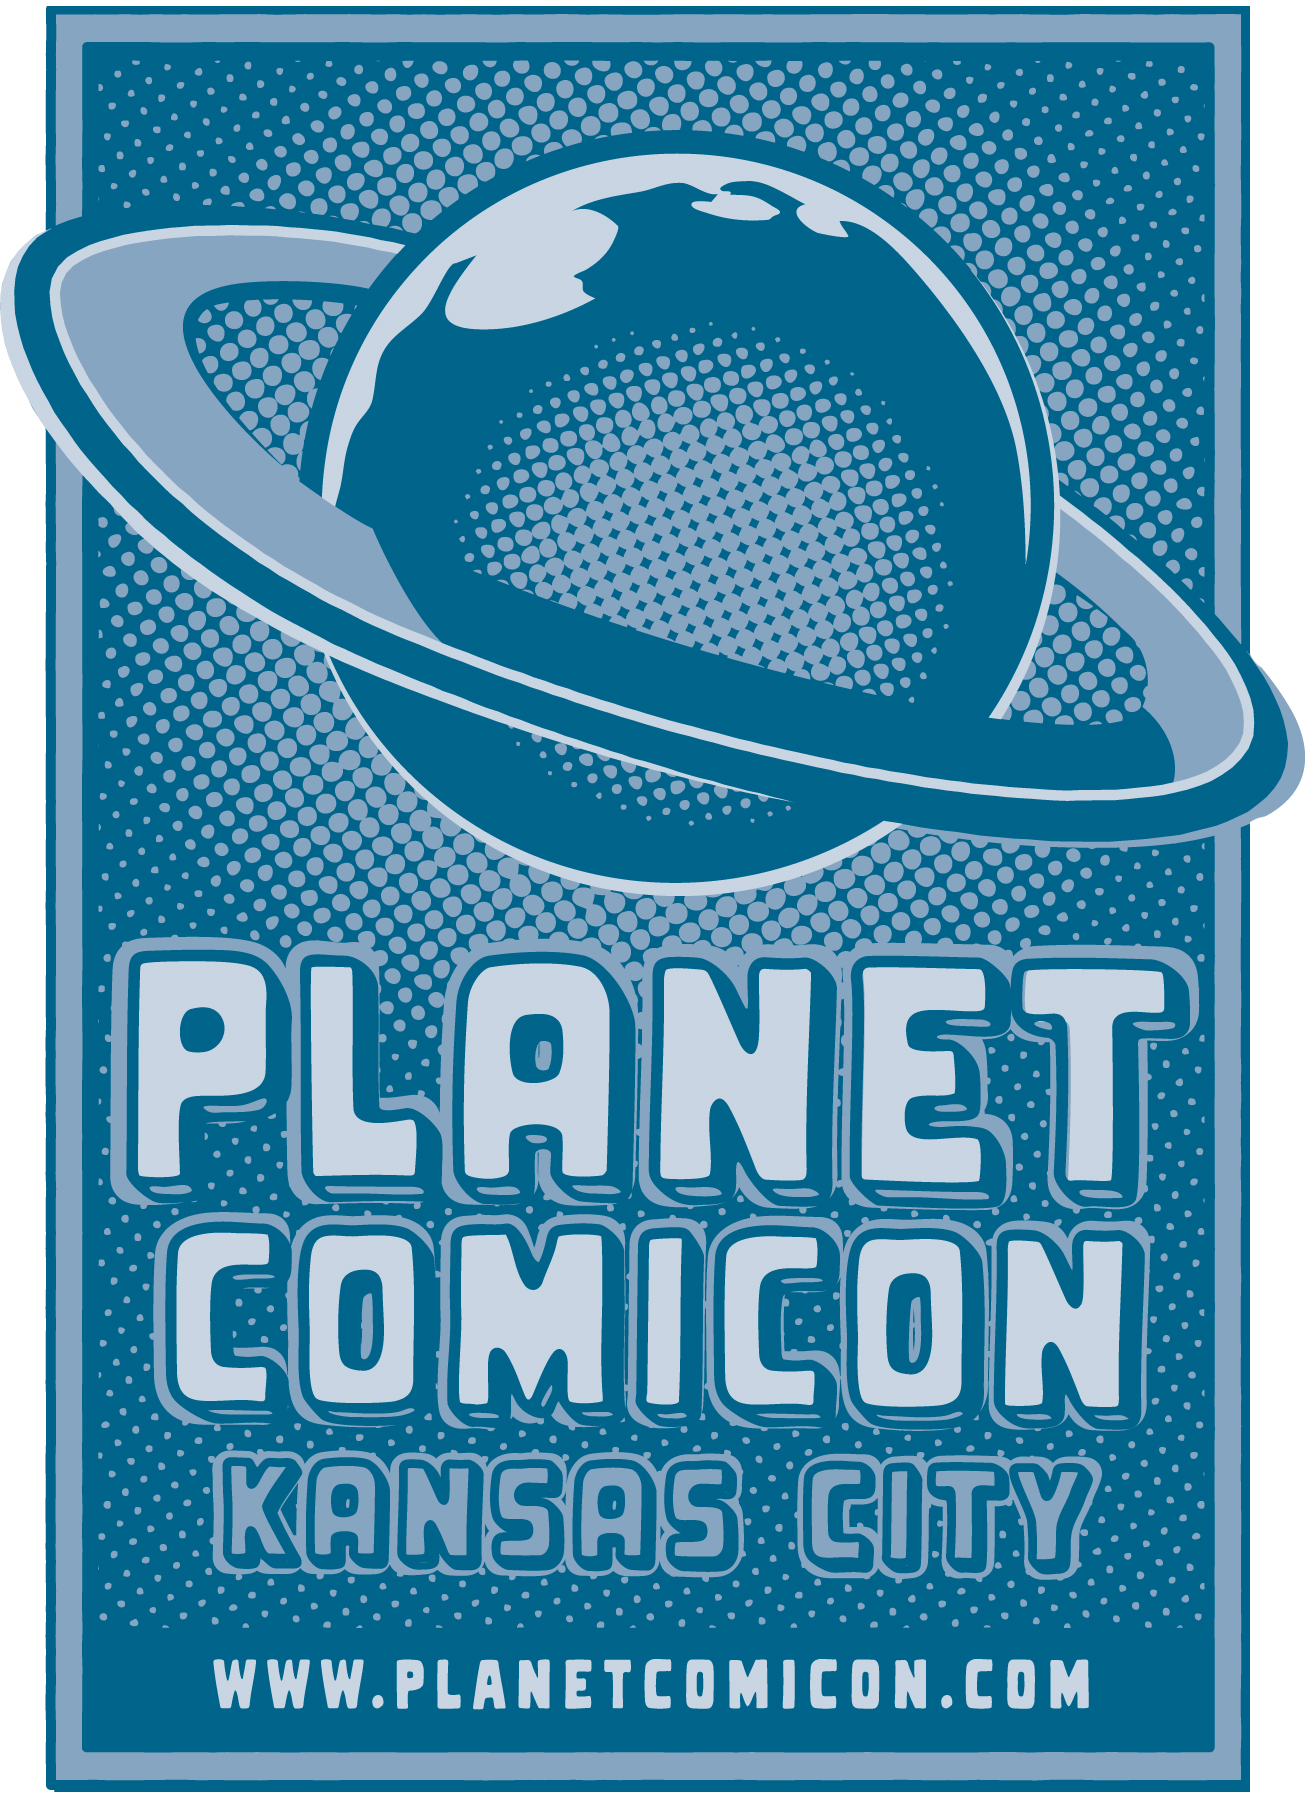 Calling all fans: Planet Comicon returning to KC